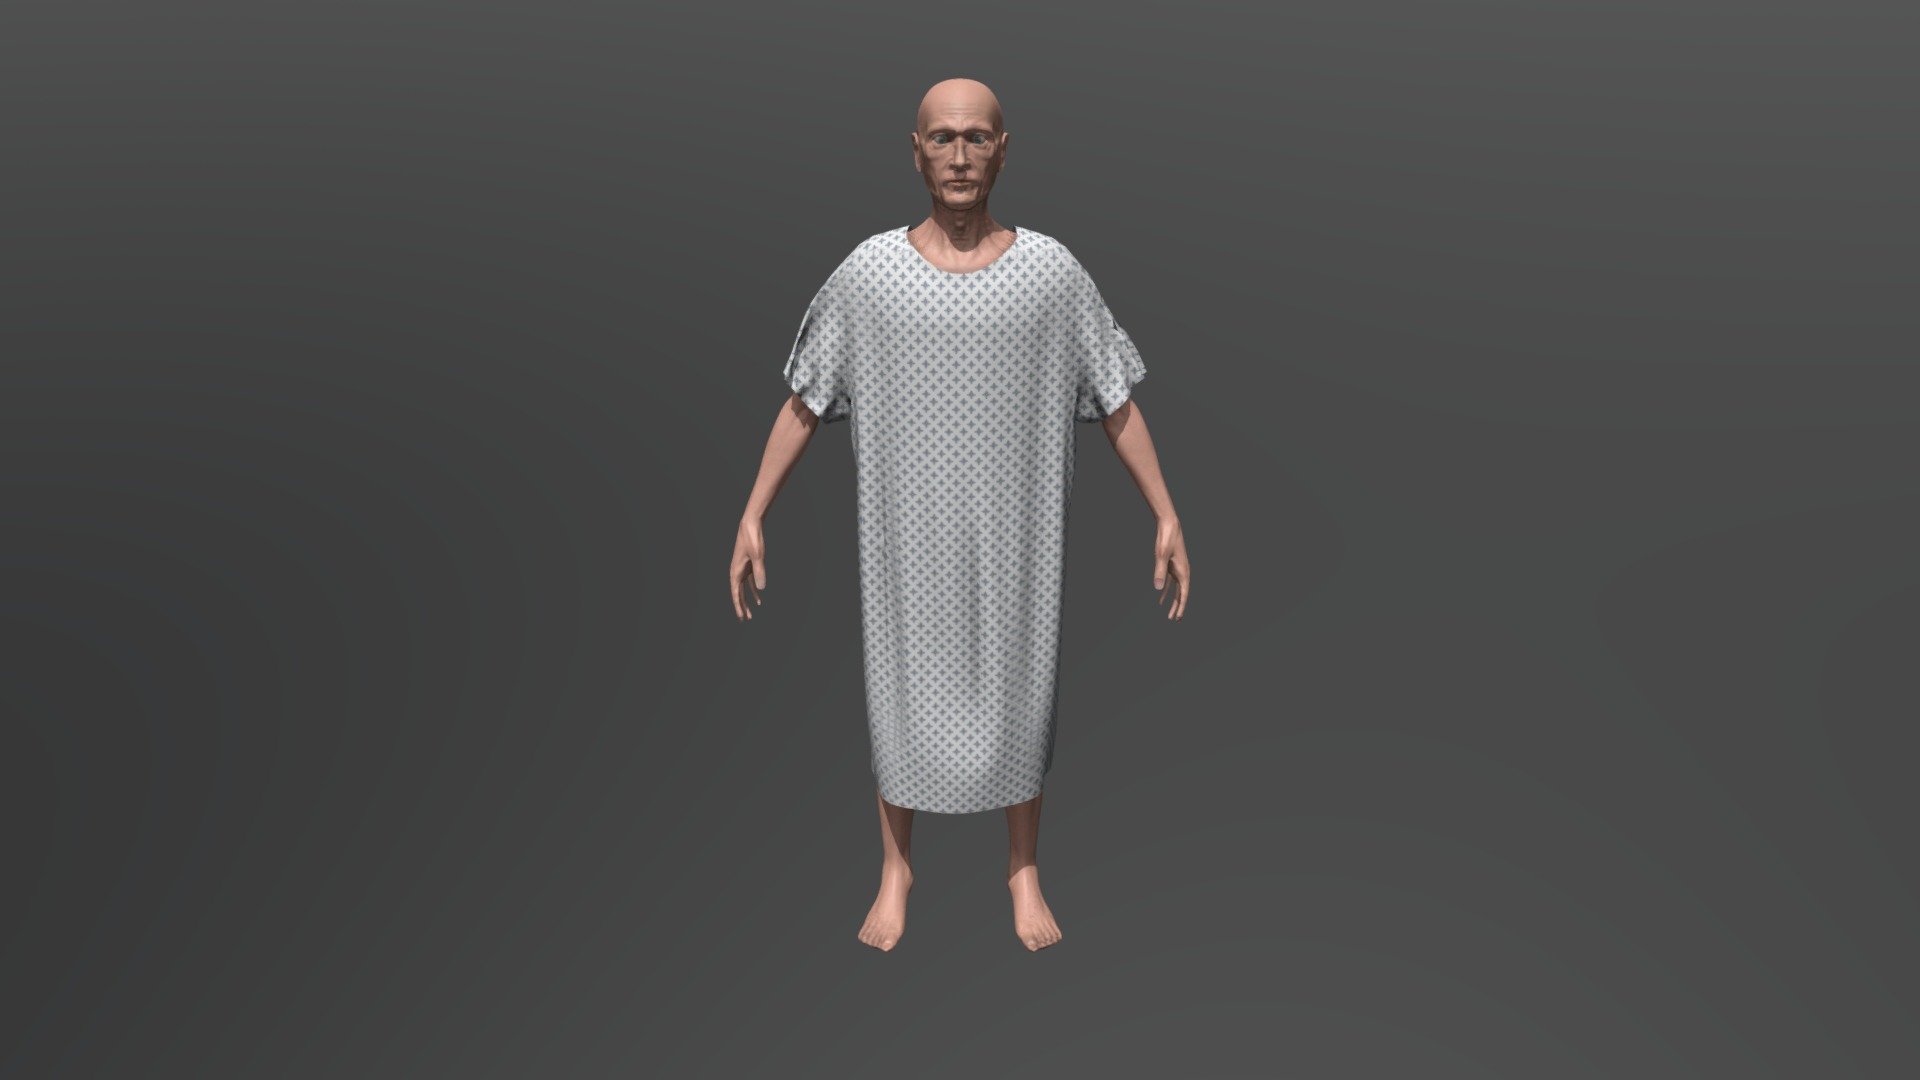 Underwear and patient gown, working with seamless textures and cloth physics 3d model